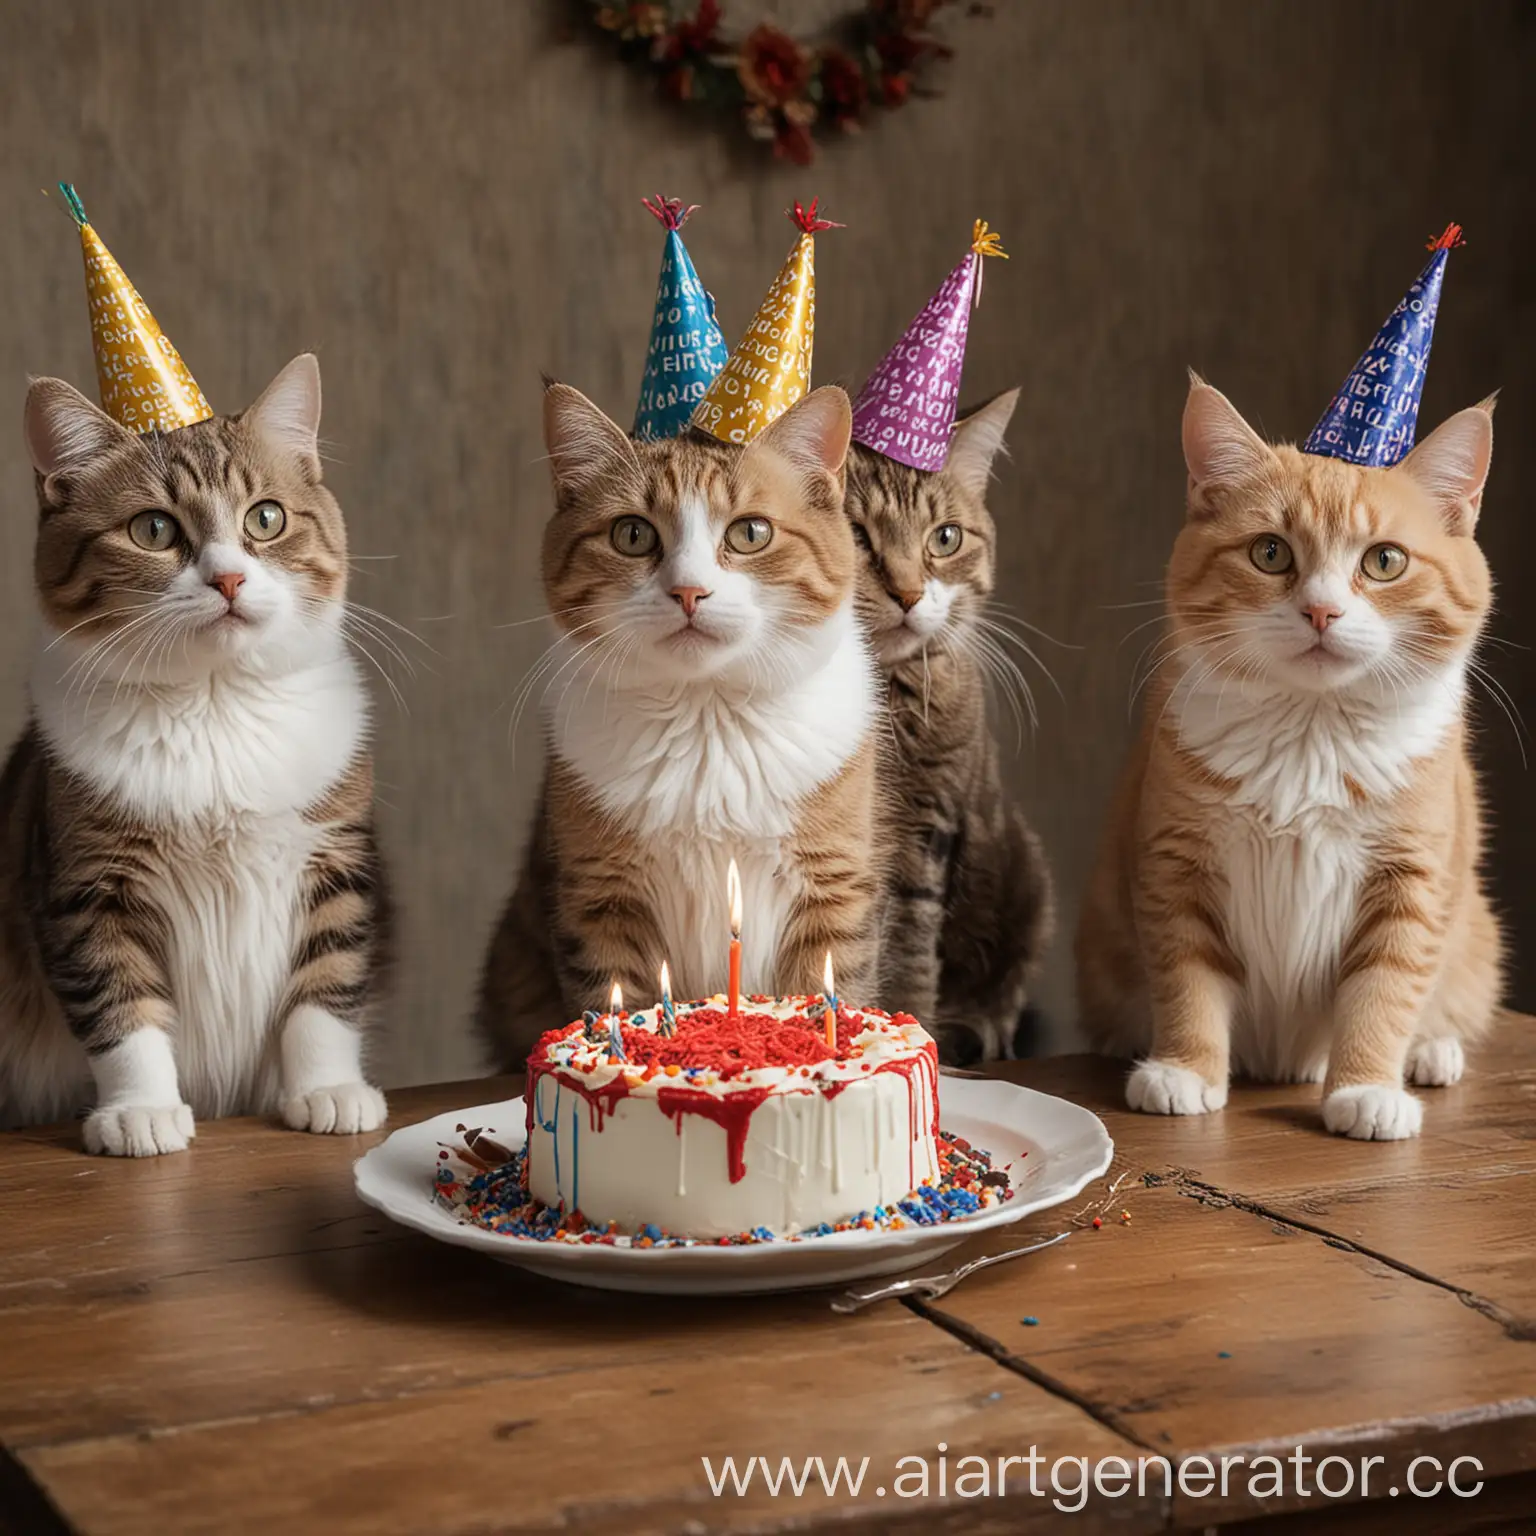 Four-Cats-Celebrating-Birthday-Party-at-Table